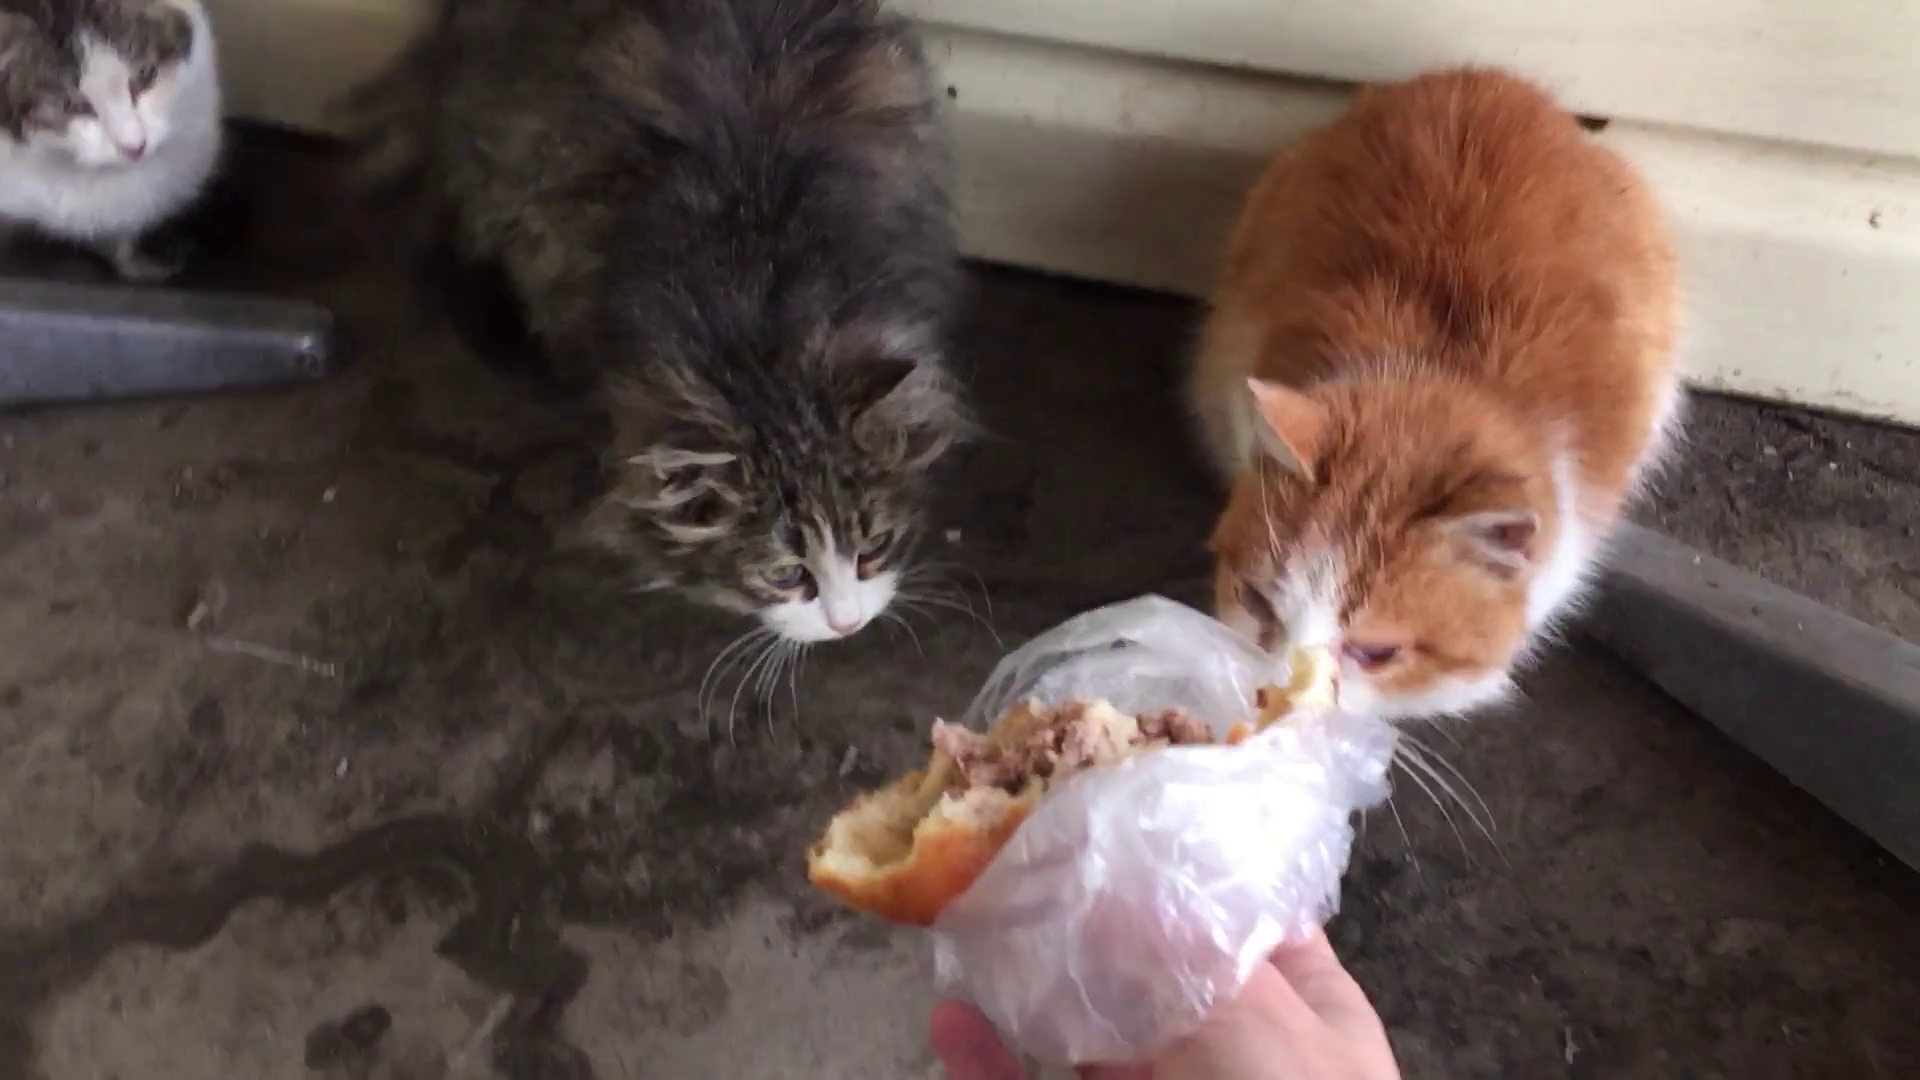 homeless dirty cats eat outside in the winter cold. man feeds stray ...